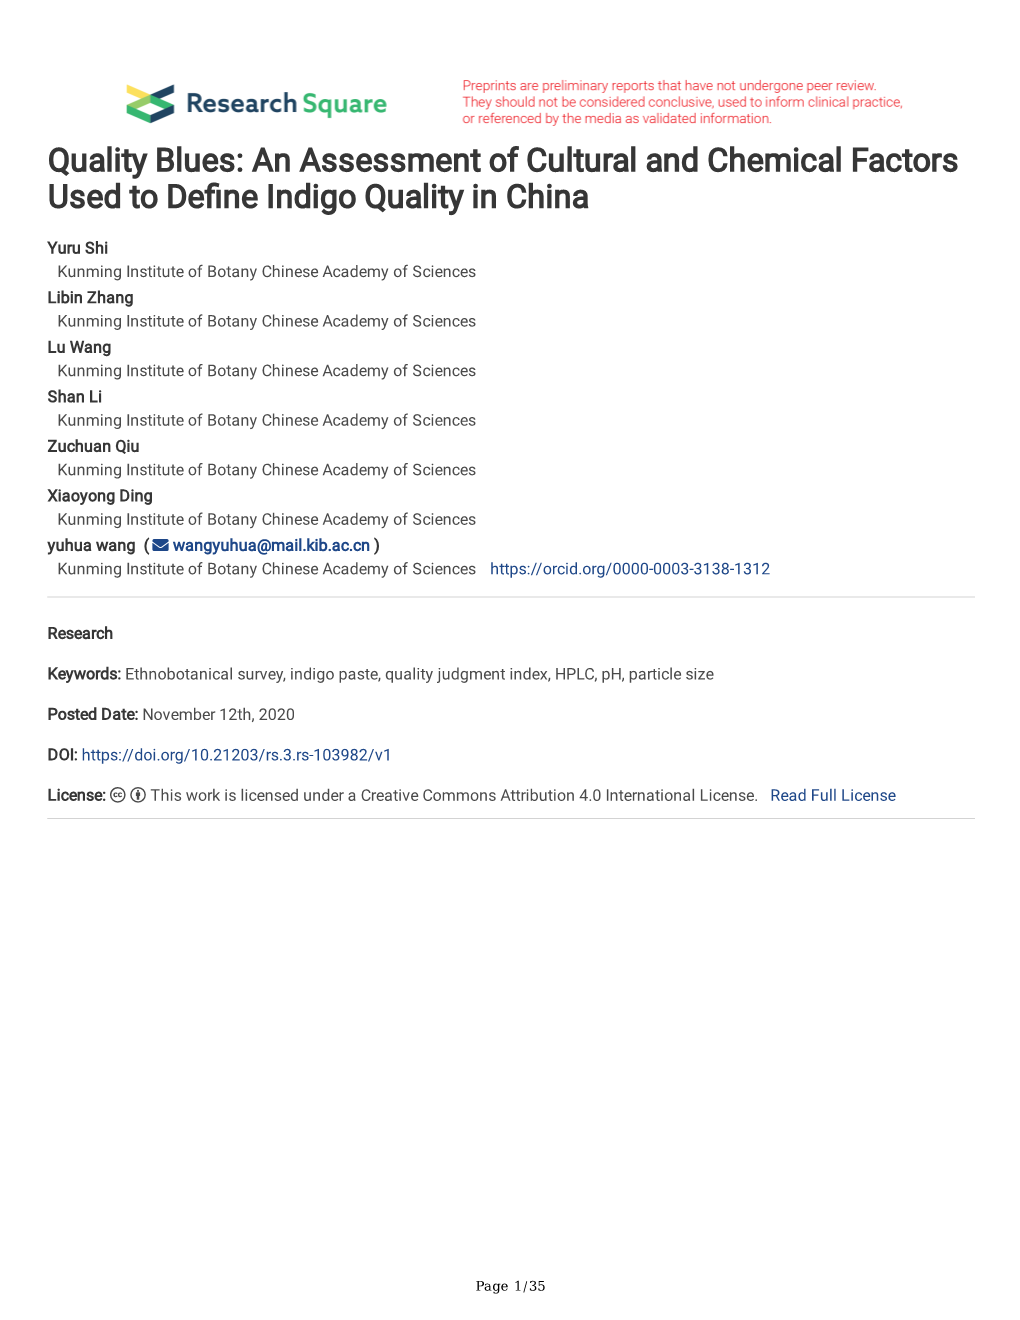 An Assessment of Cultural and Chemical Factors Used to De Ne